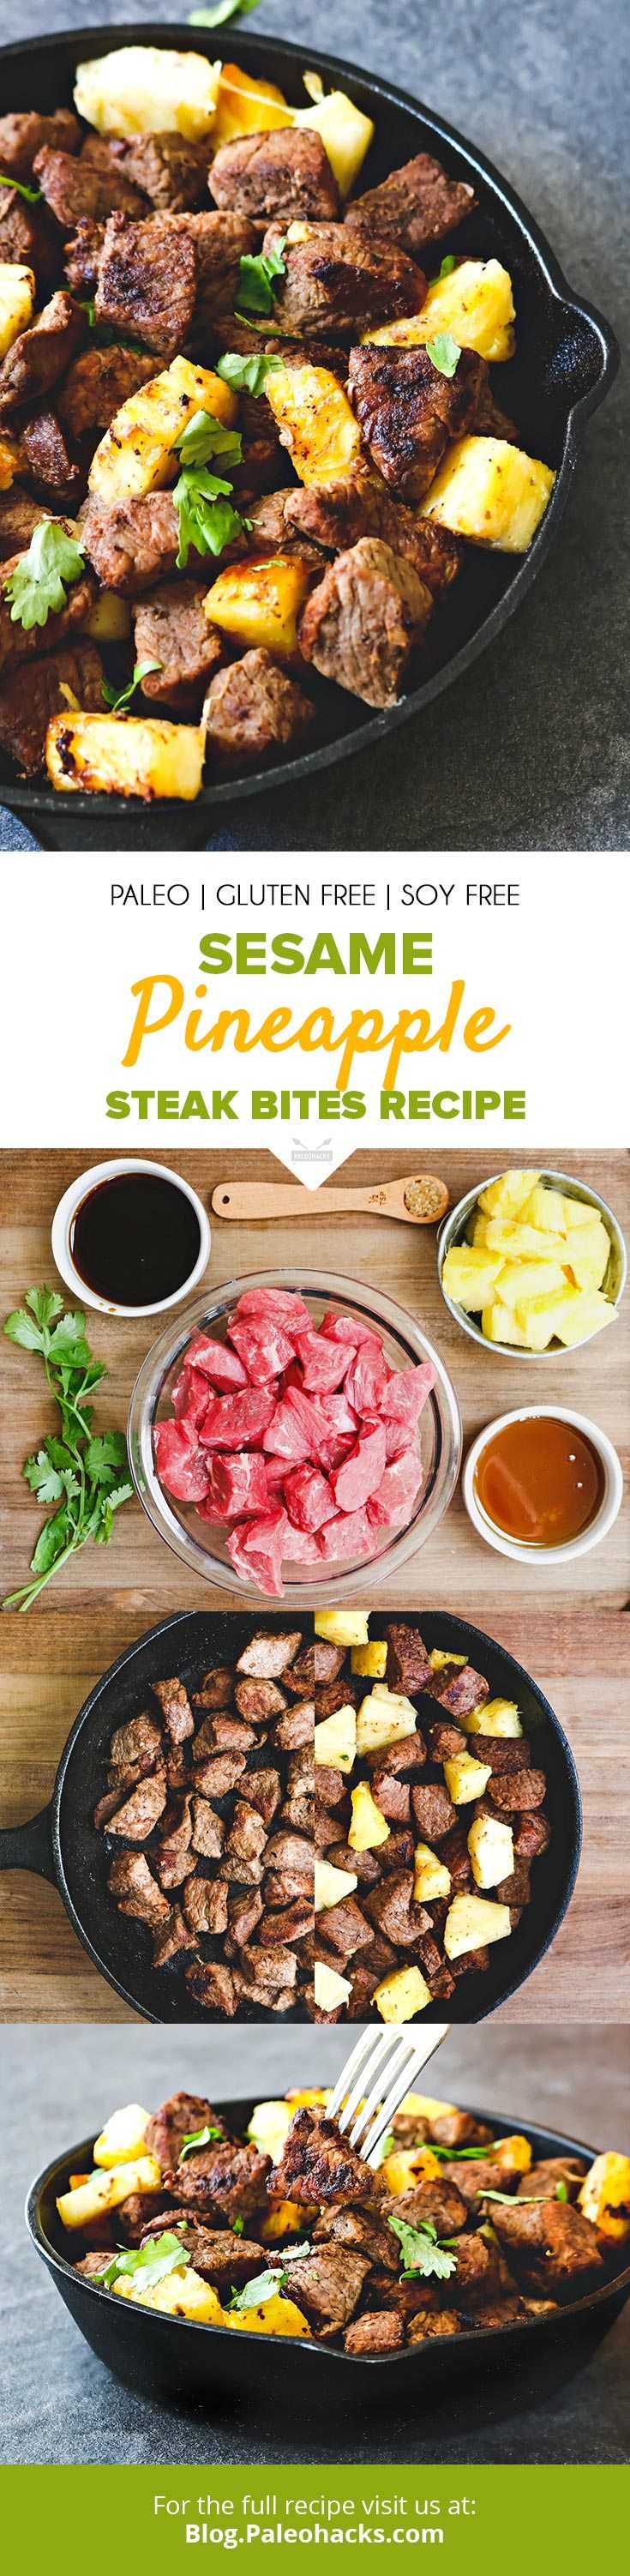 These one-pan Sesame Pineapple Steak Bites are bursting with tropical flavor! Perfect for a quick lunch or dinner.